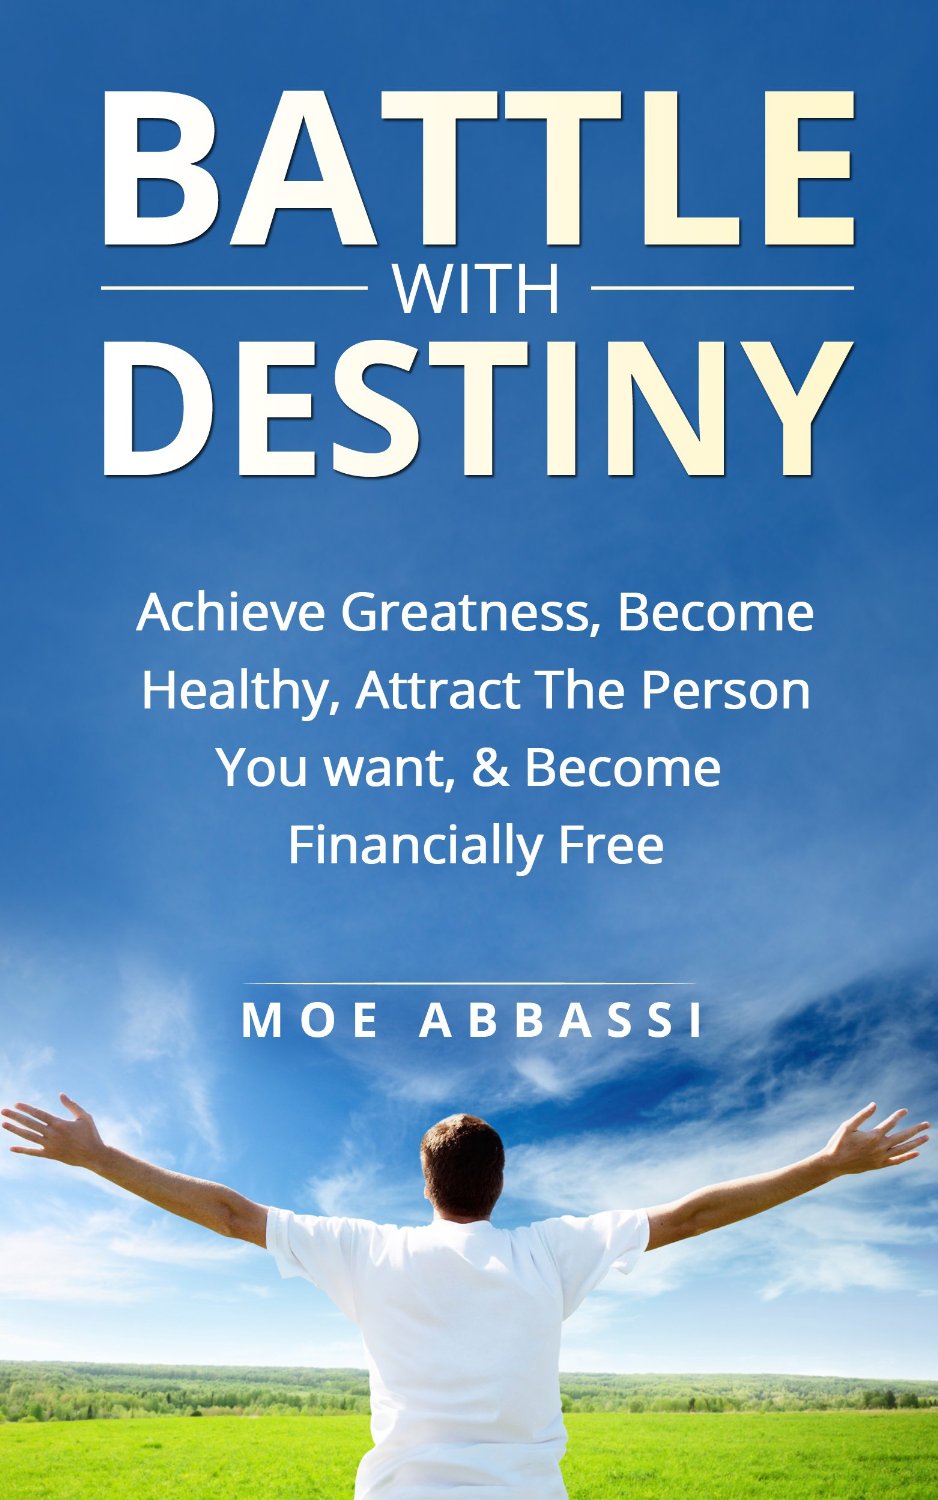 The Battle With Destiny: How to Achieve Greatness, Success, & Happiness; Achieve Your Goals, Find Love, Become Healthy, Become Financially Free, & Live Your Dreams by Moe Abbassi